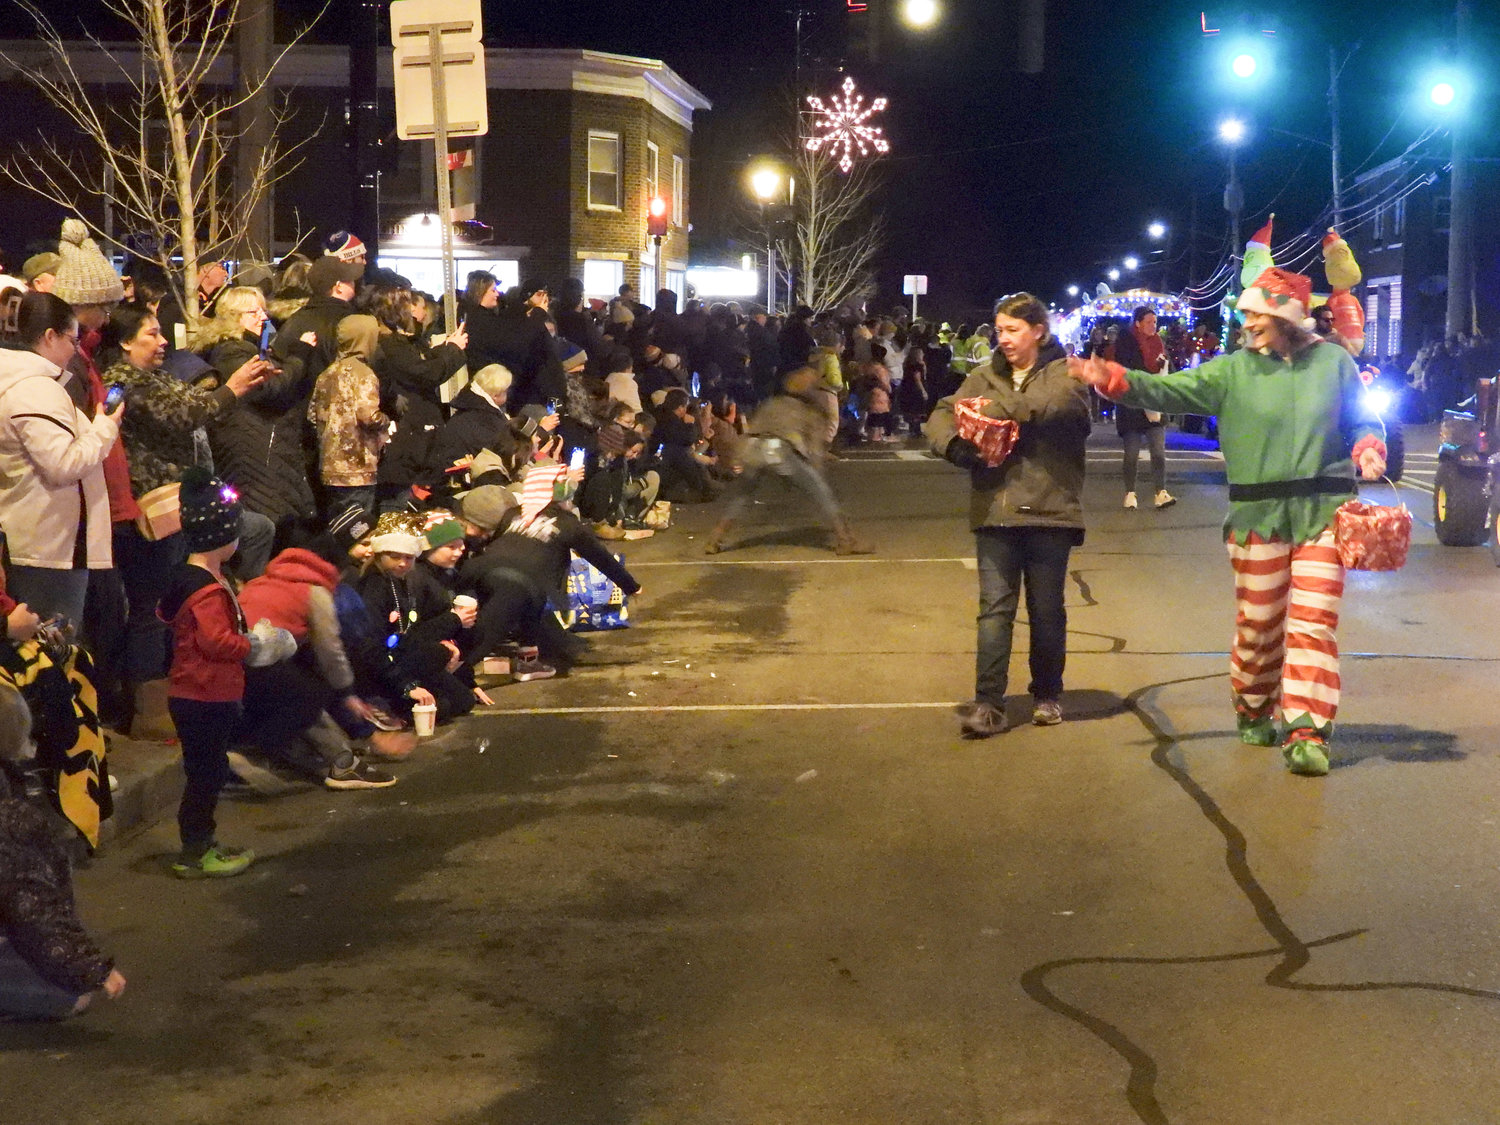 The Canastota Parade of Lights saw people fill the streets Saturday night to welcome in the holiday season.